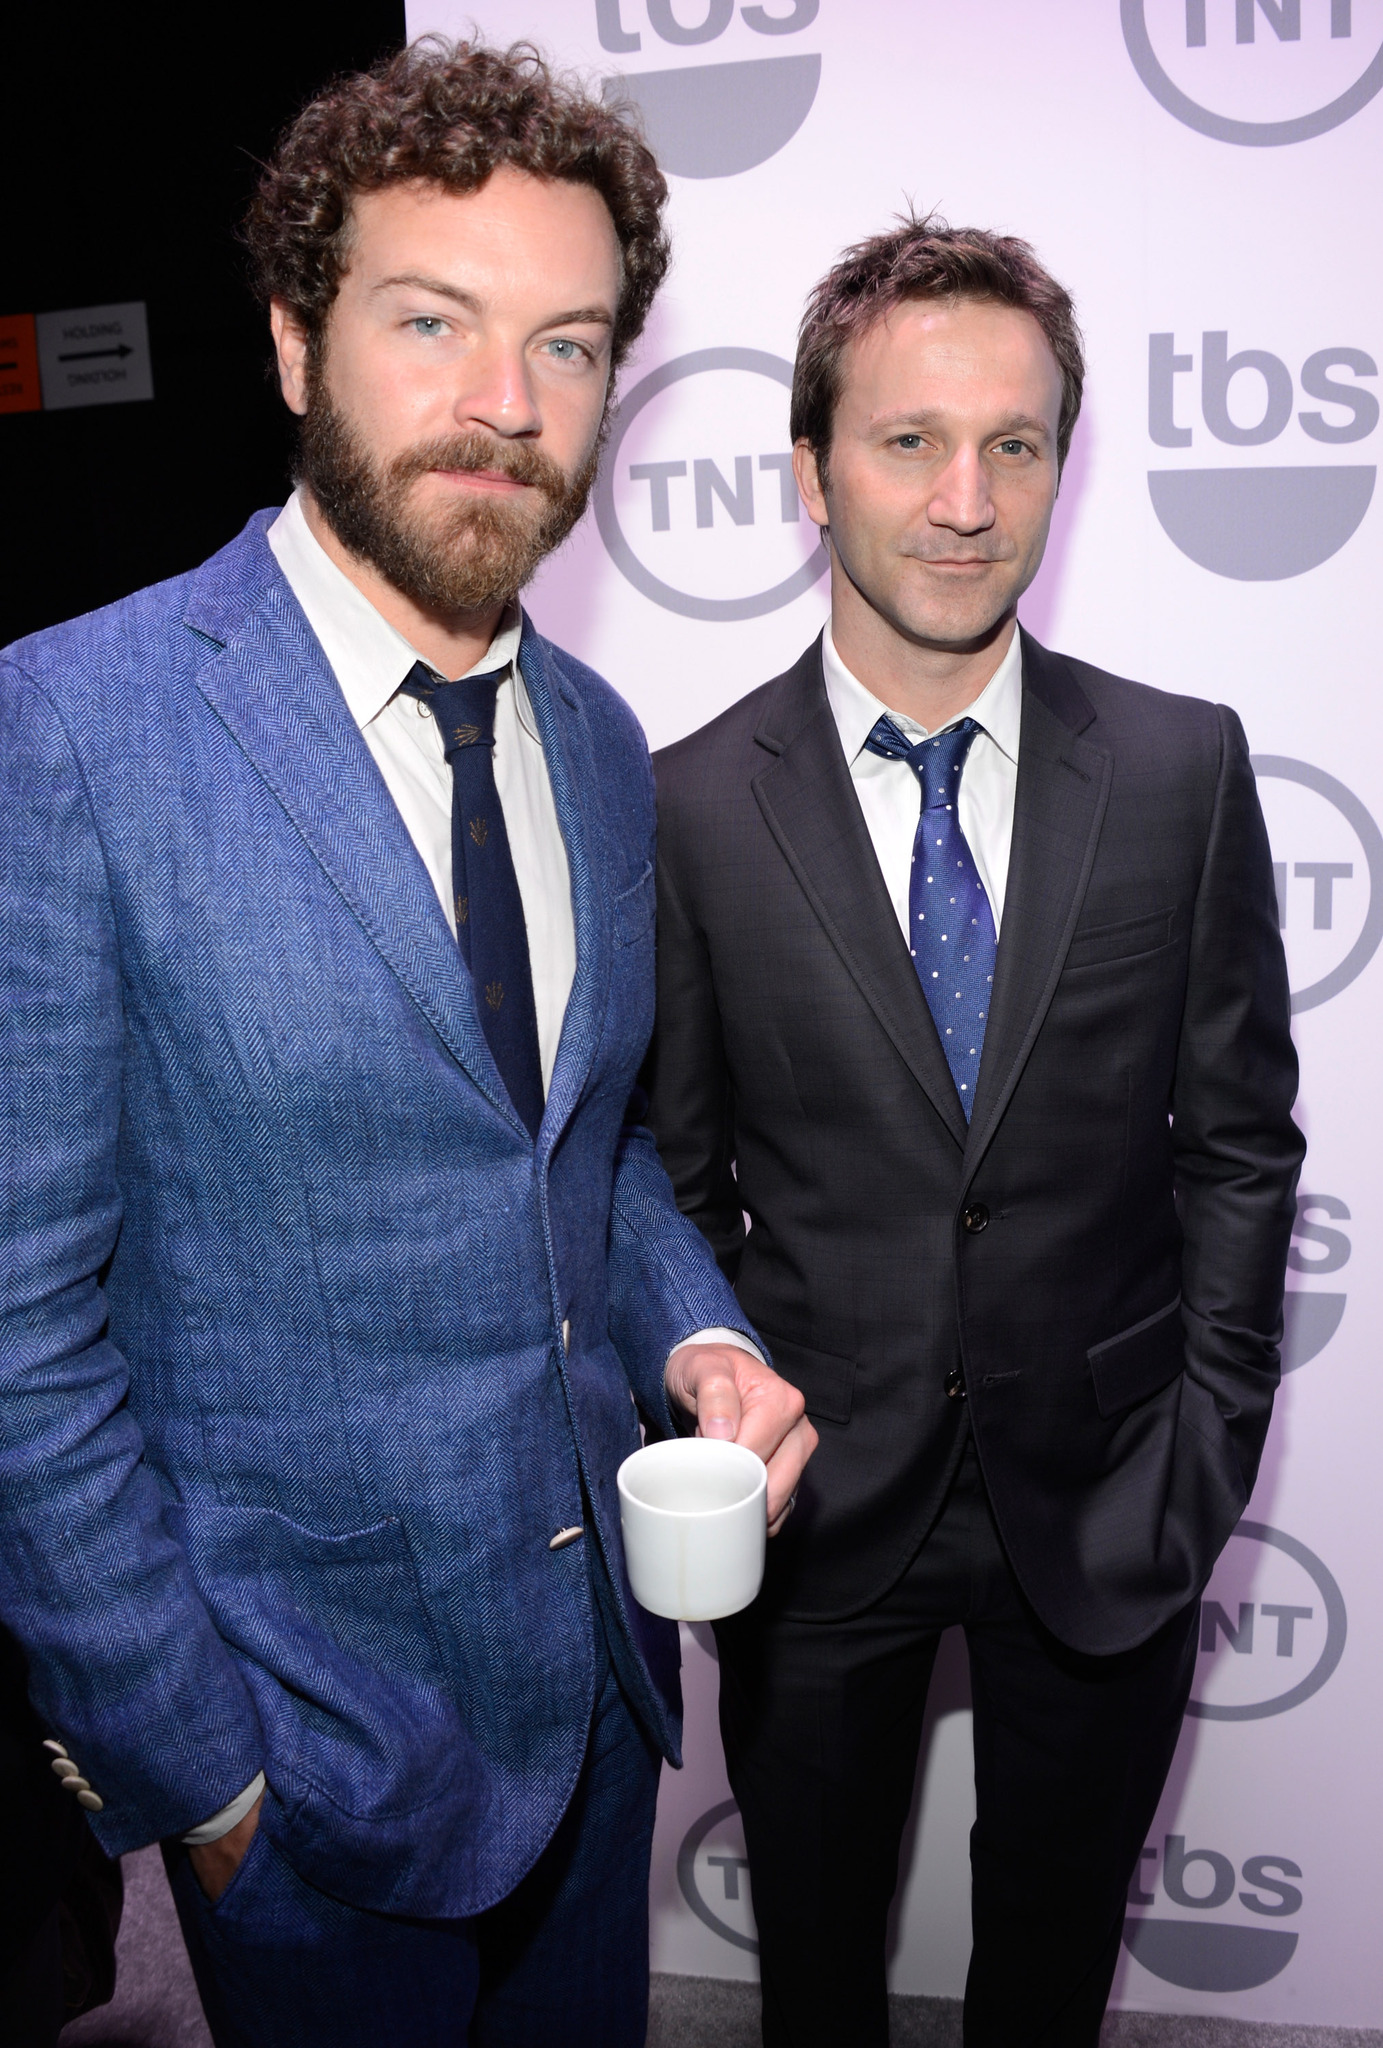 Danny Masterson and Breckin Meyer